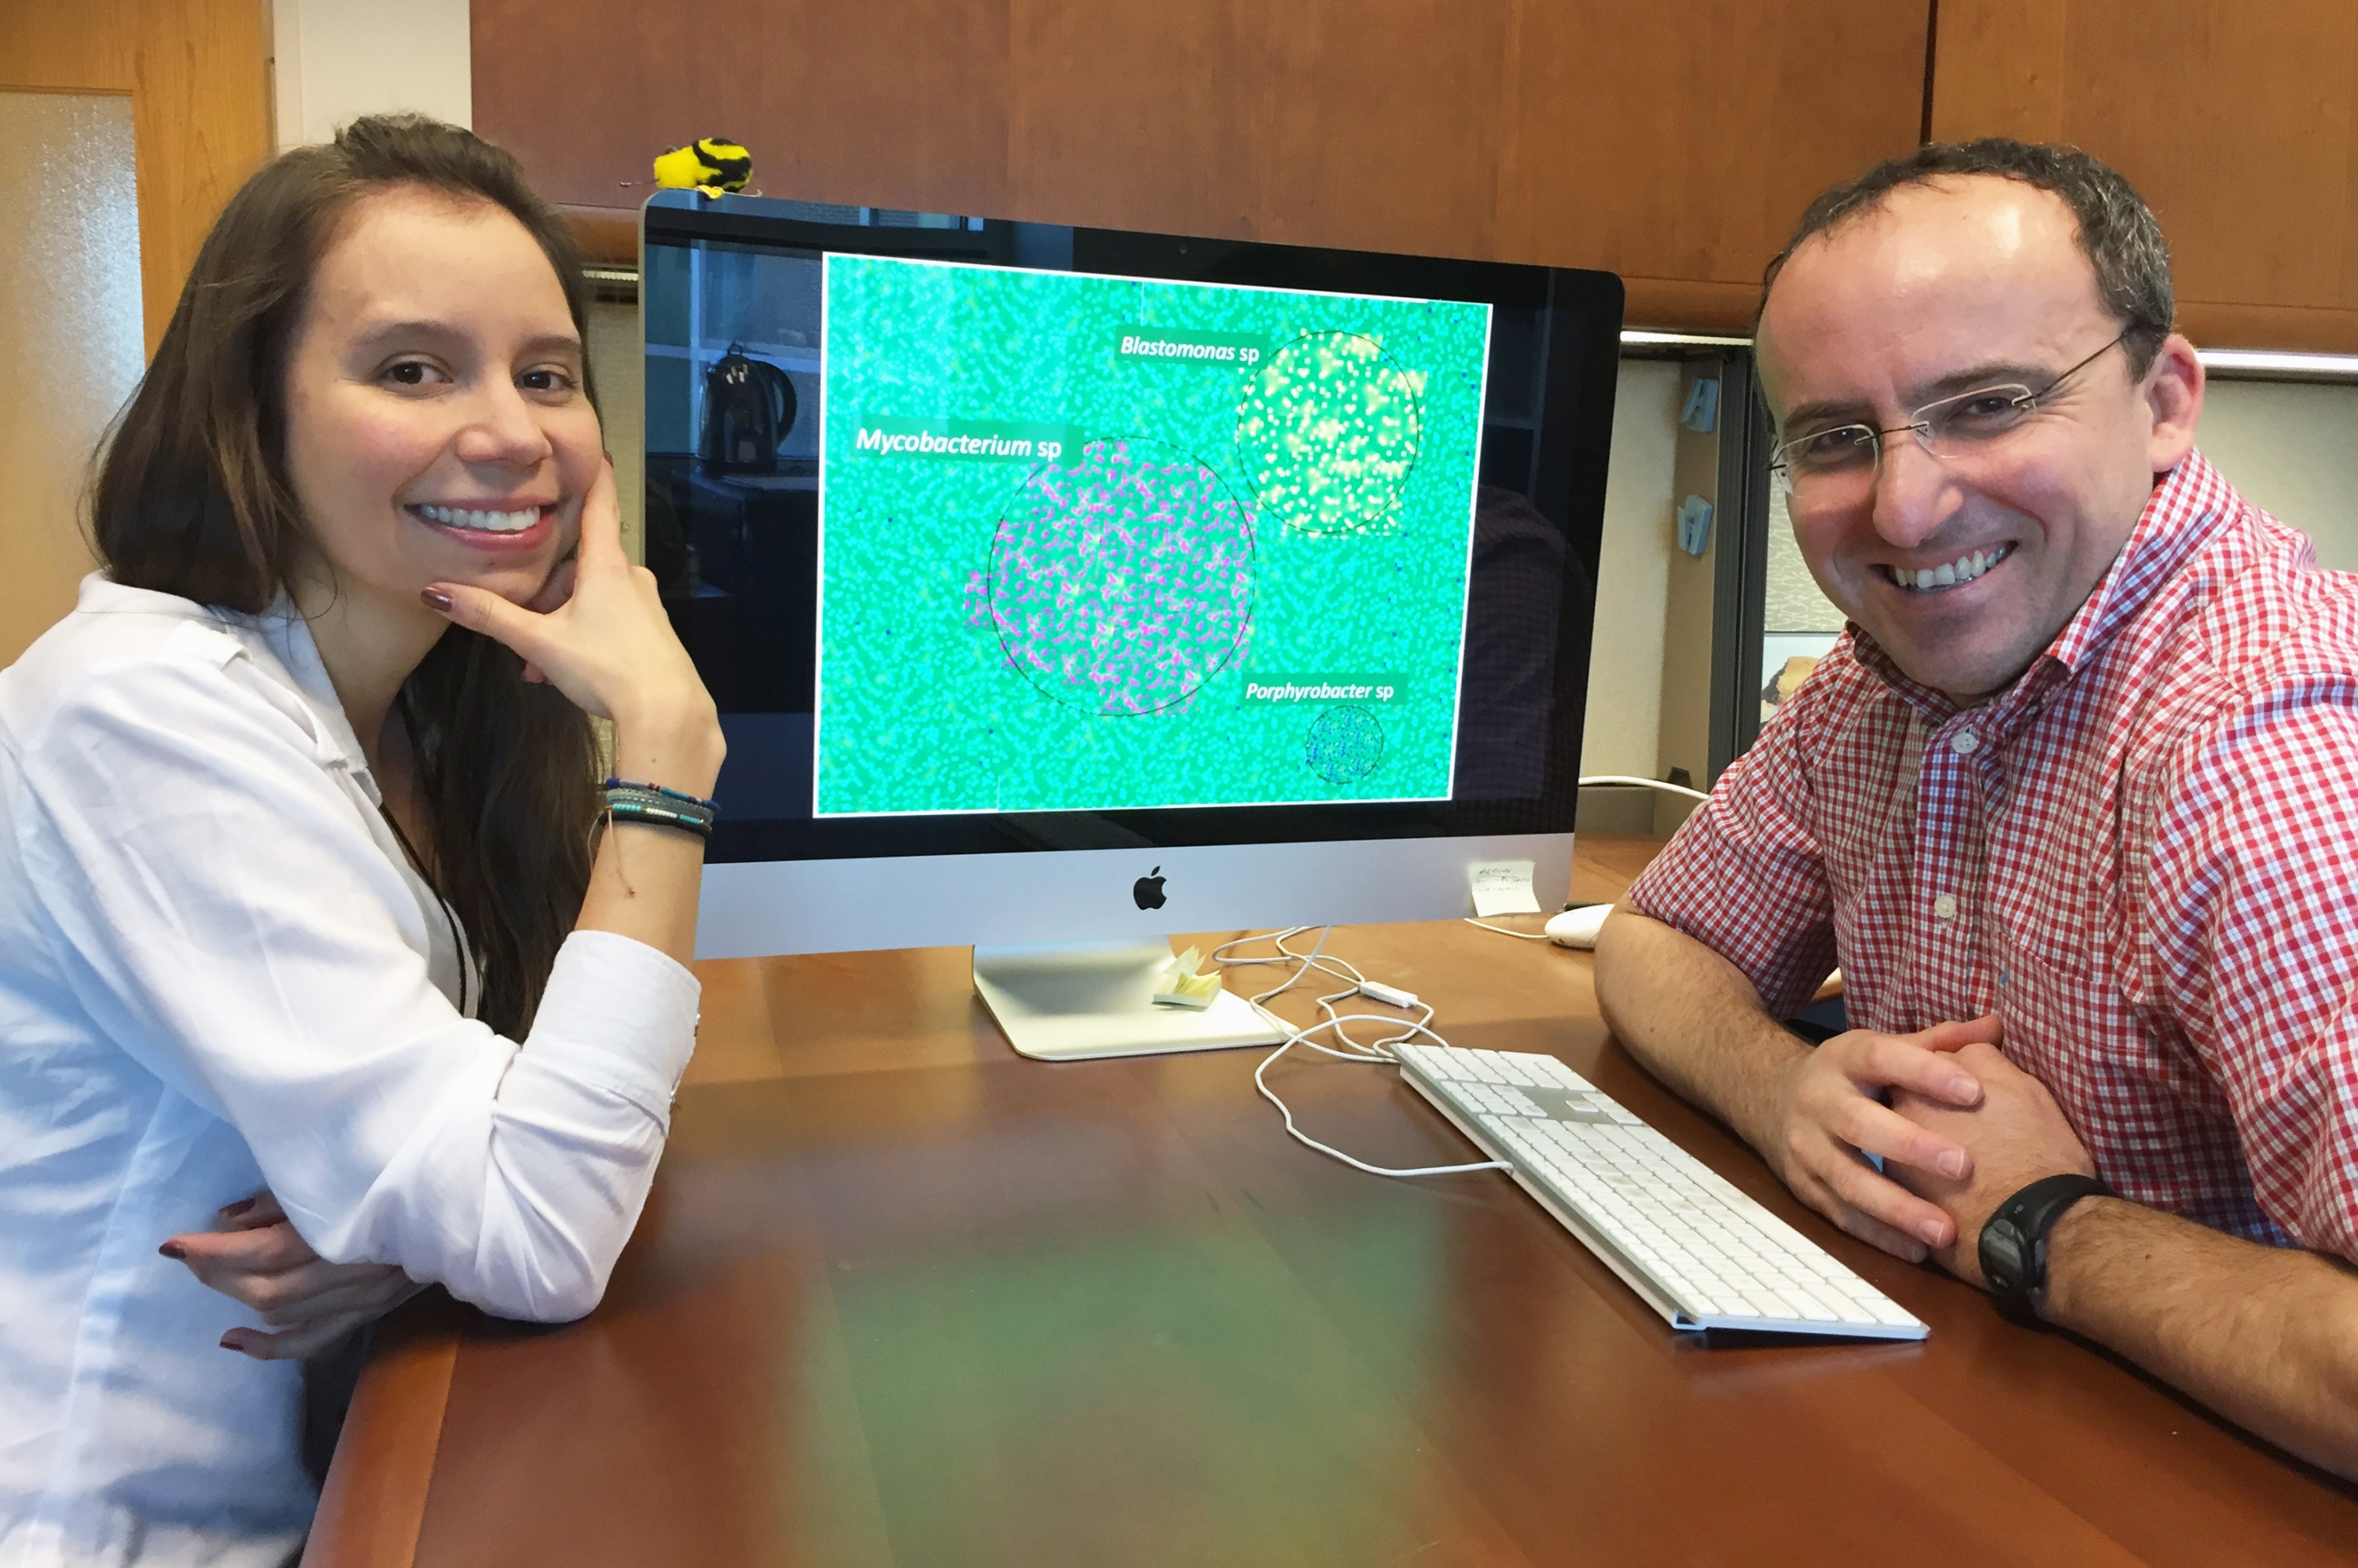 Georgia Tech Doctoral Student Maria Juliana Soto-Girón and School of Civil and Environmental Engineering Professor Kostas Konstantinidis are shown with images of bacteria. Research done with scientists from the U.S. Environmental Protection Agency documented bacteria in shower hoses taken from hospital patient rooms. (Credit: John Toon, Georgia Tech).